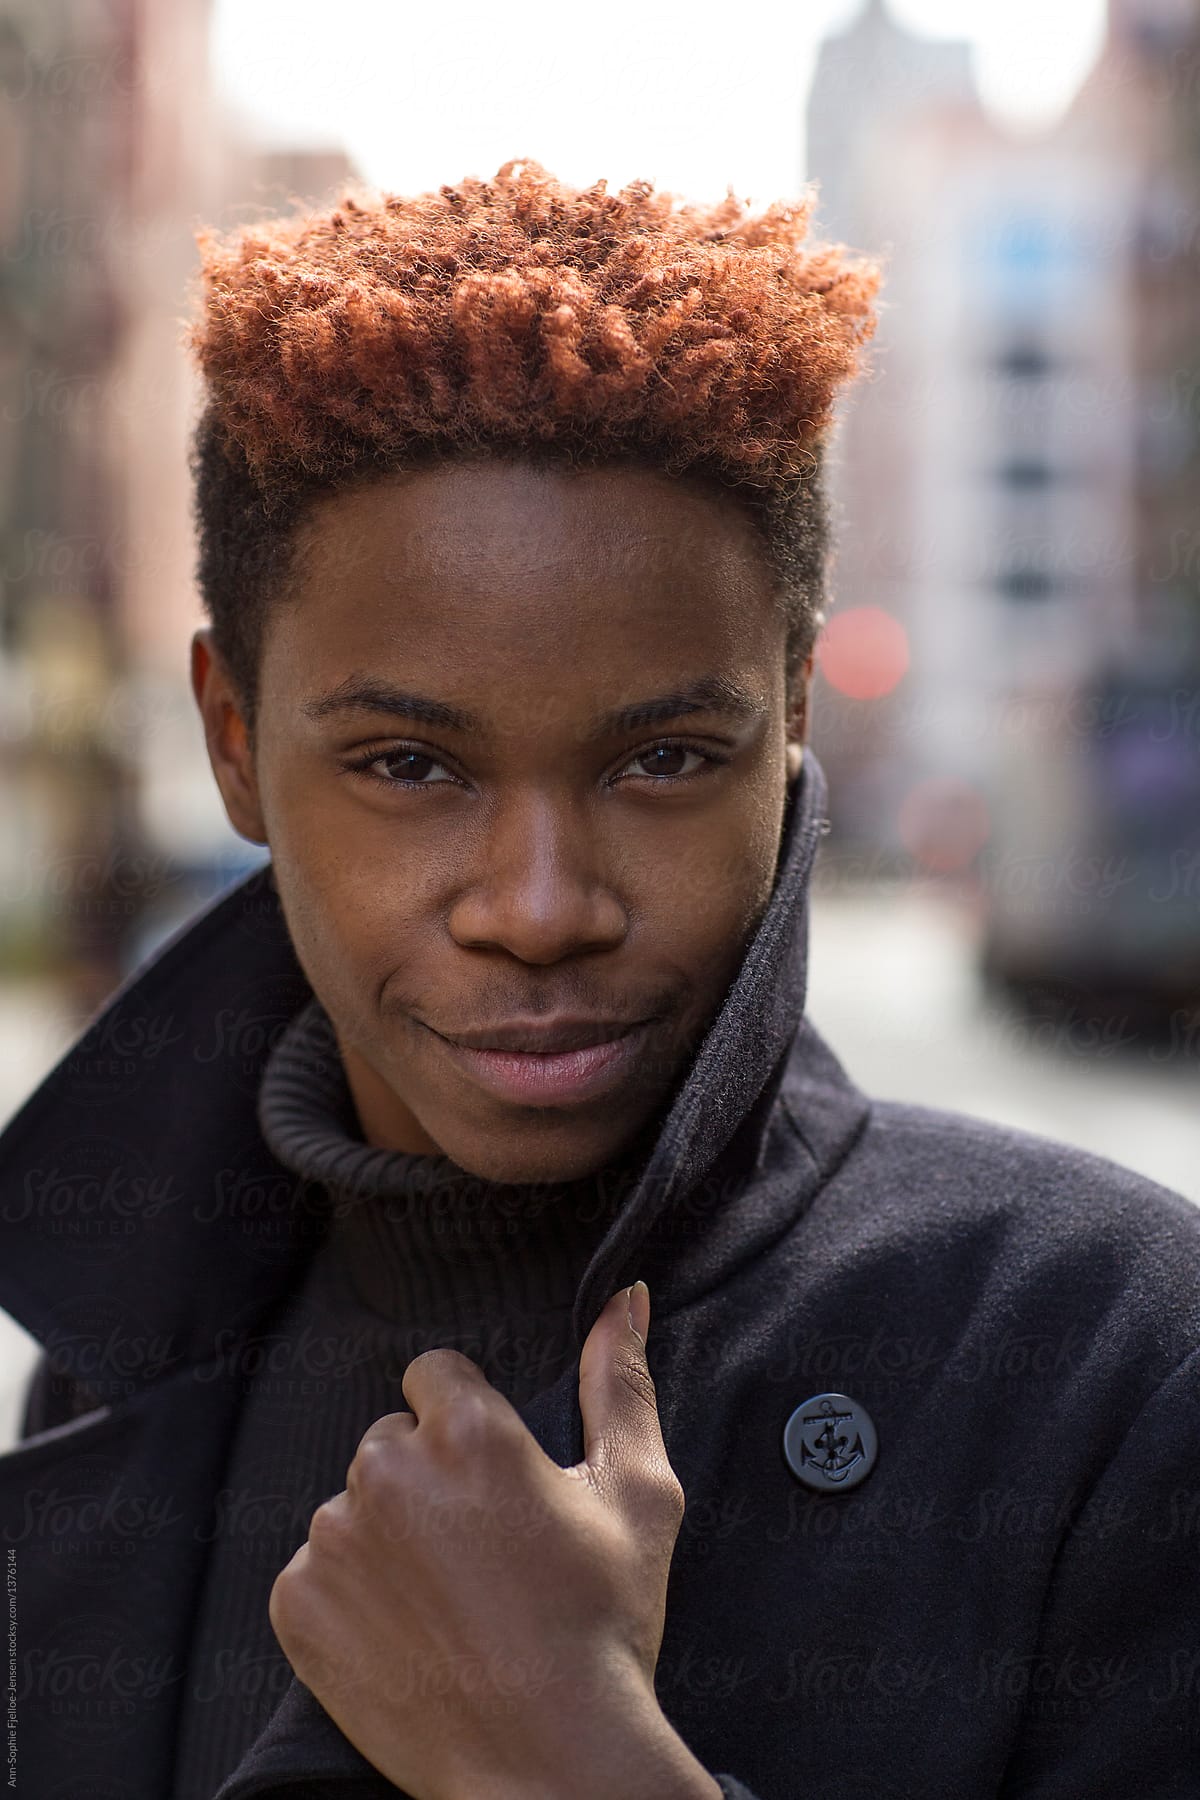 Black guy with red hair